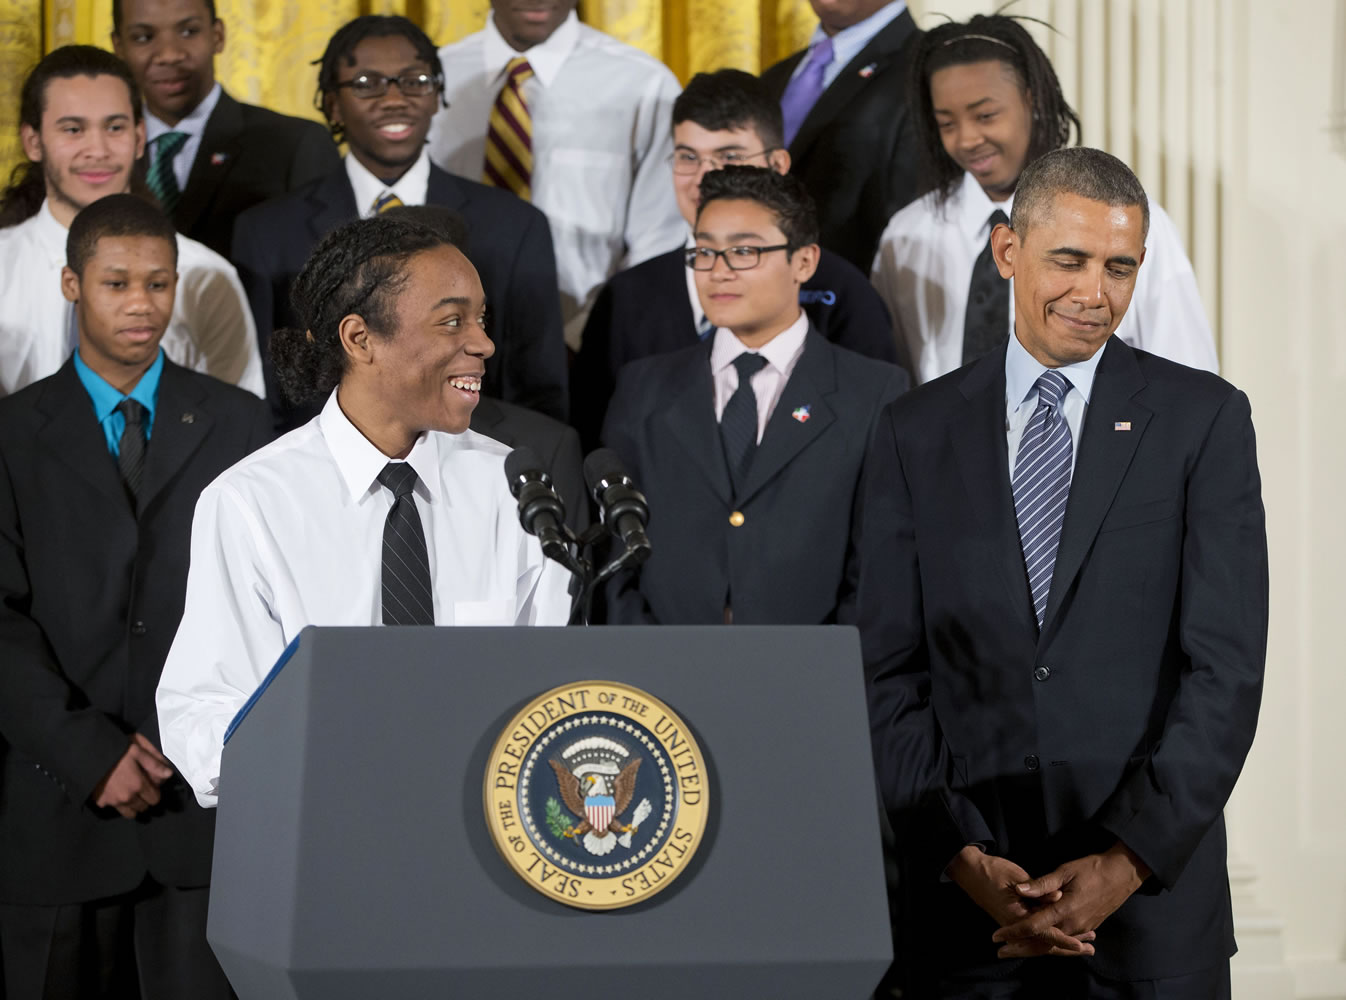 President Barack Obama is introduced by Christian Champagne, 18, a senior at Hyde Park Career Academy in Chicago, before speaking about his new initiative to provide greater opportunities for young black and Hispanic men called &quot;My Brother's Keeper&quot; on Thursday at the White House.